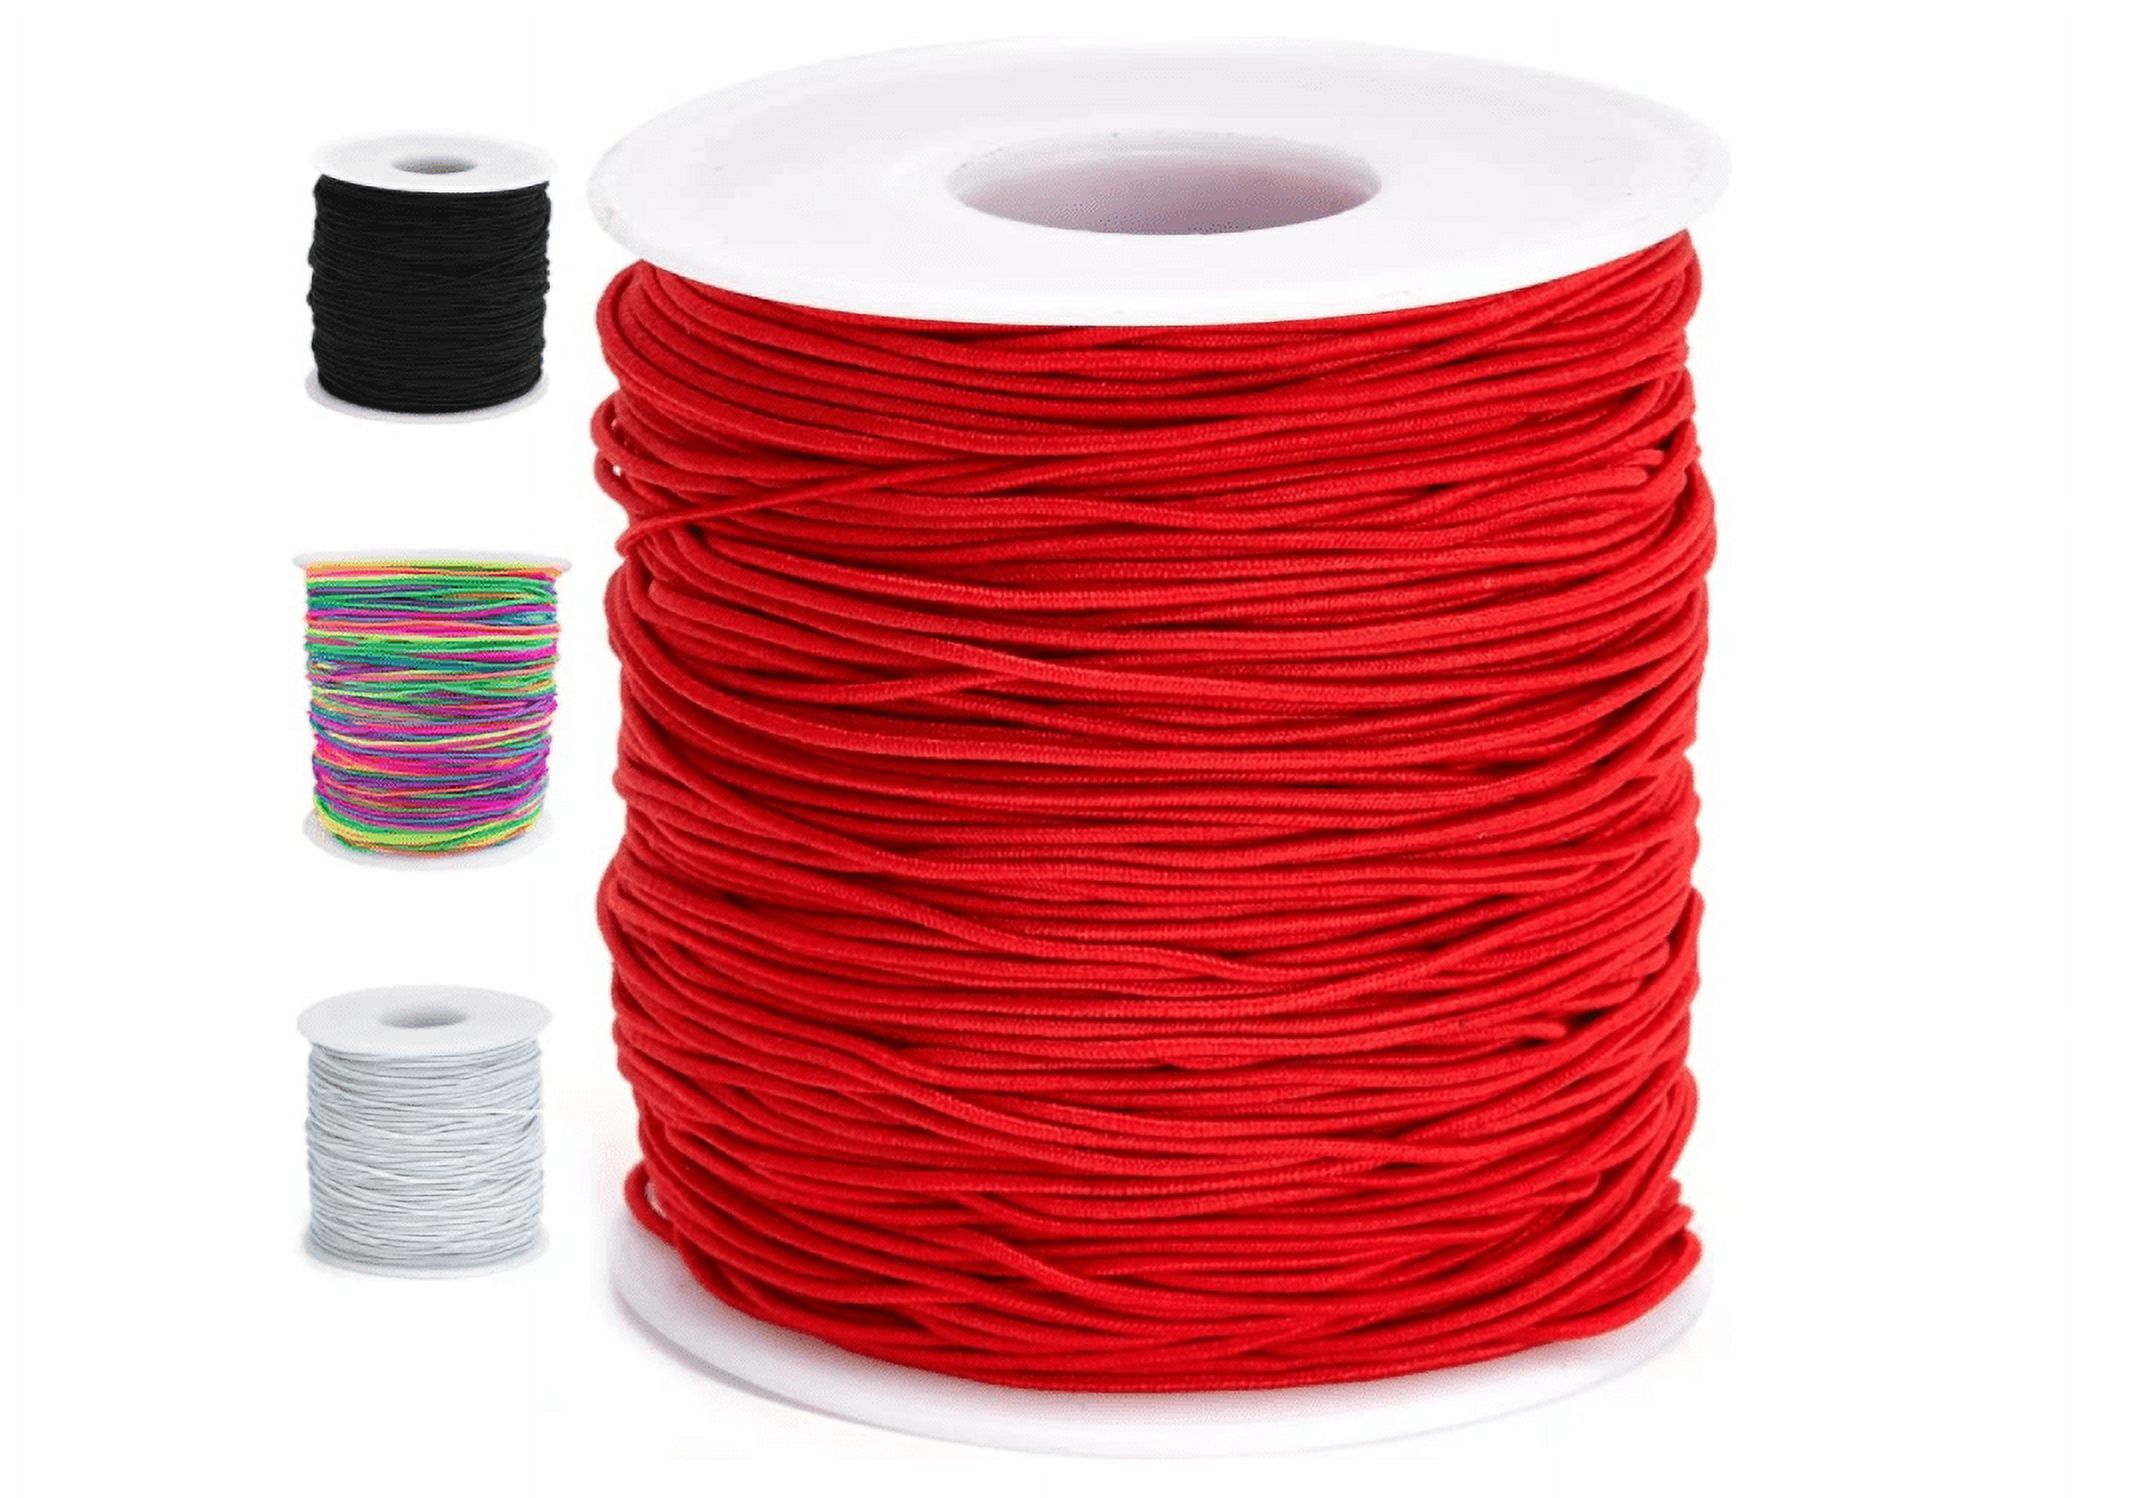 Topboutique Elastic String, 1mm Red Bracelet String Elastic Thread for  Jewelry Making, 100m Stretchy Necklace String Cord for Beading, 100m Red 